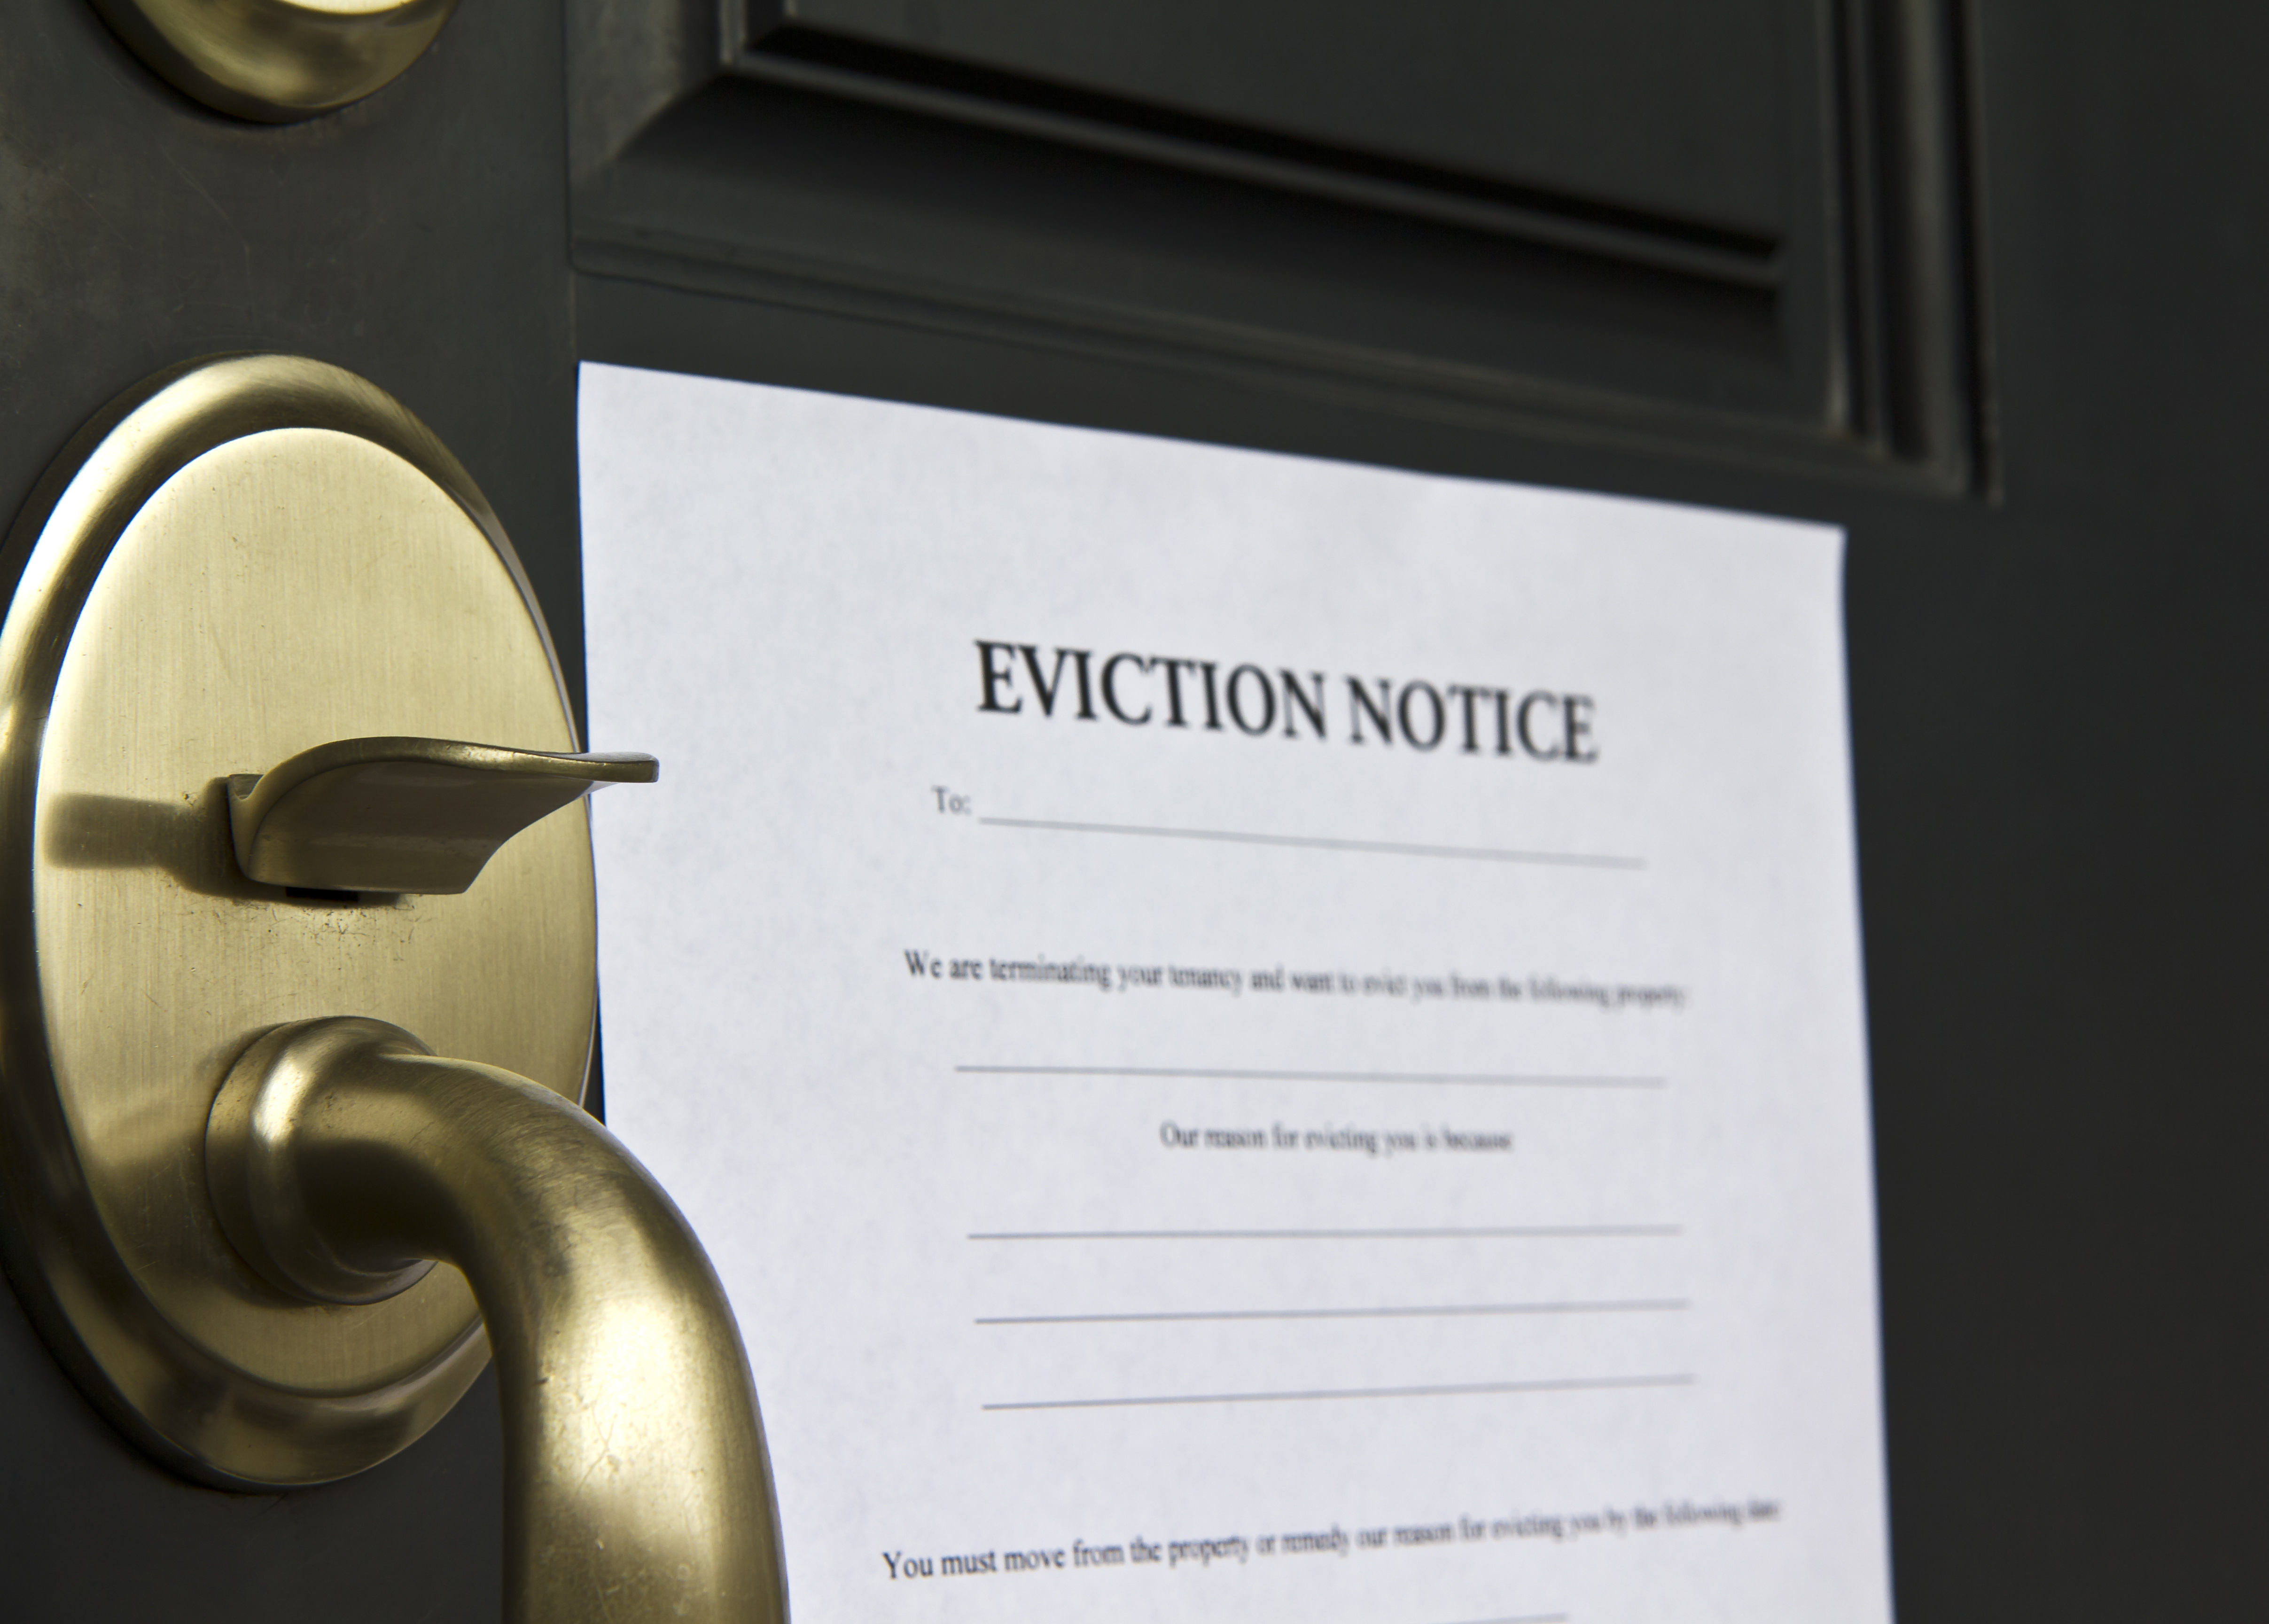 When can a Landlord evict a Tenant in the State of Florida?